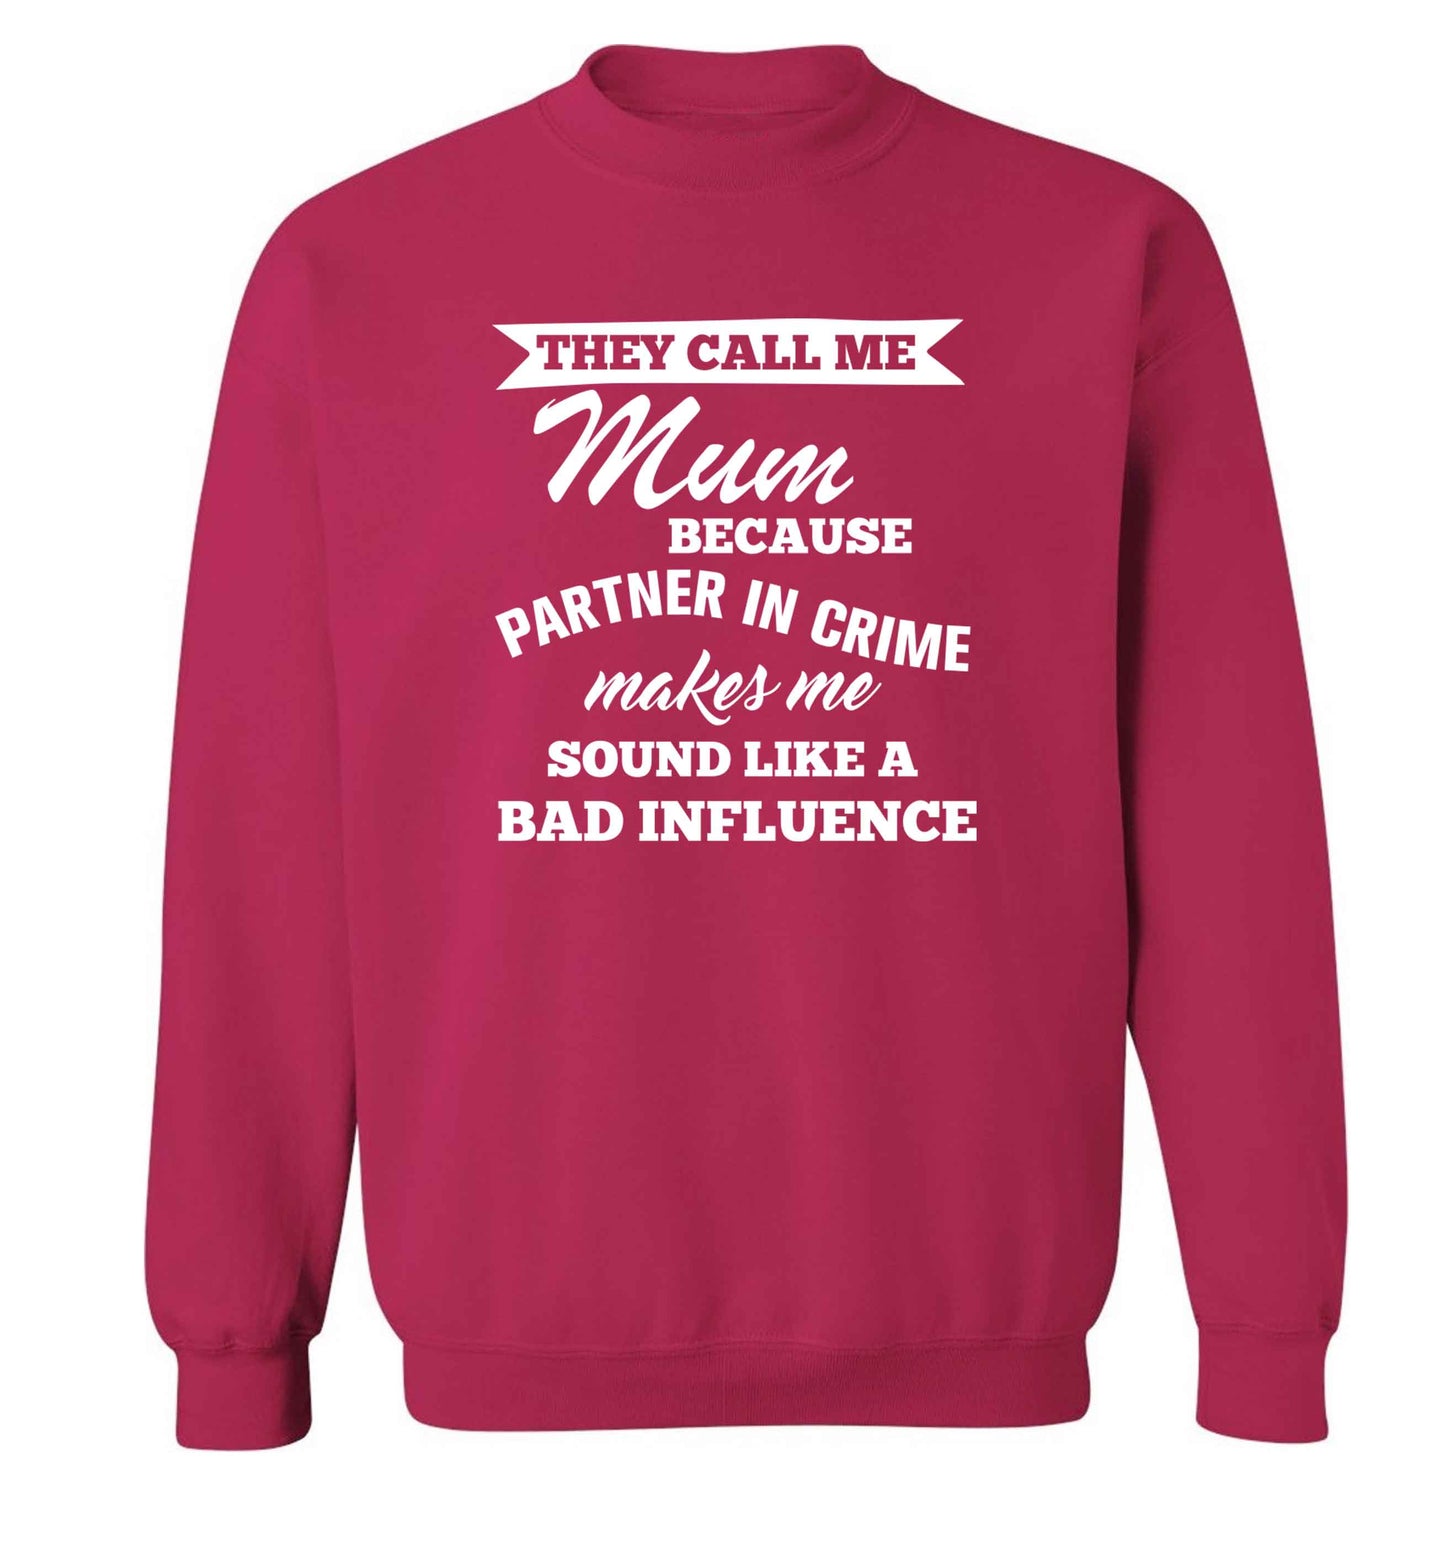 They call me mum because partner in crime makes me sound like a bad influence adult's unisex pink sweater 2XL